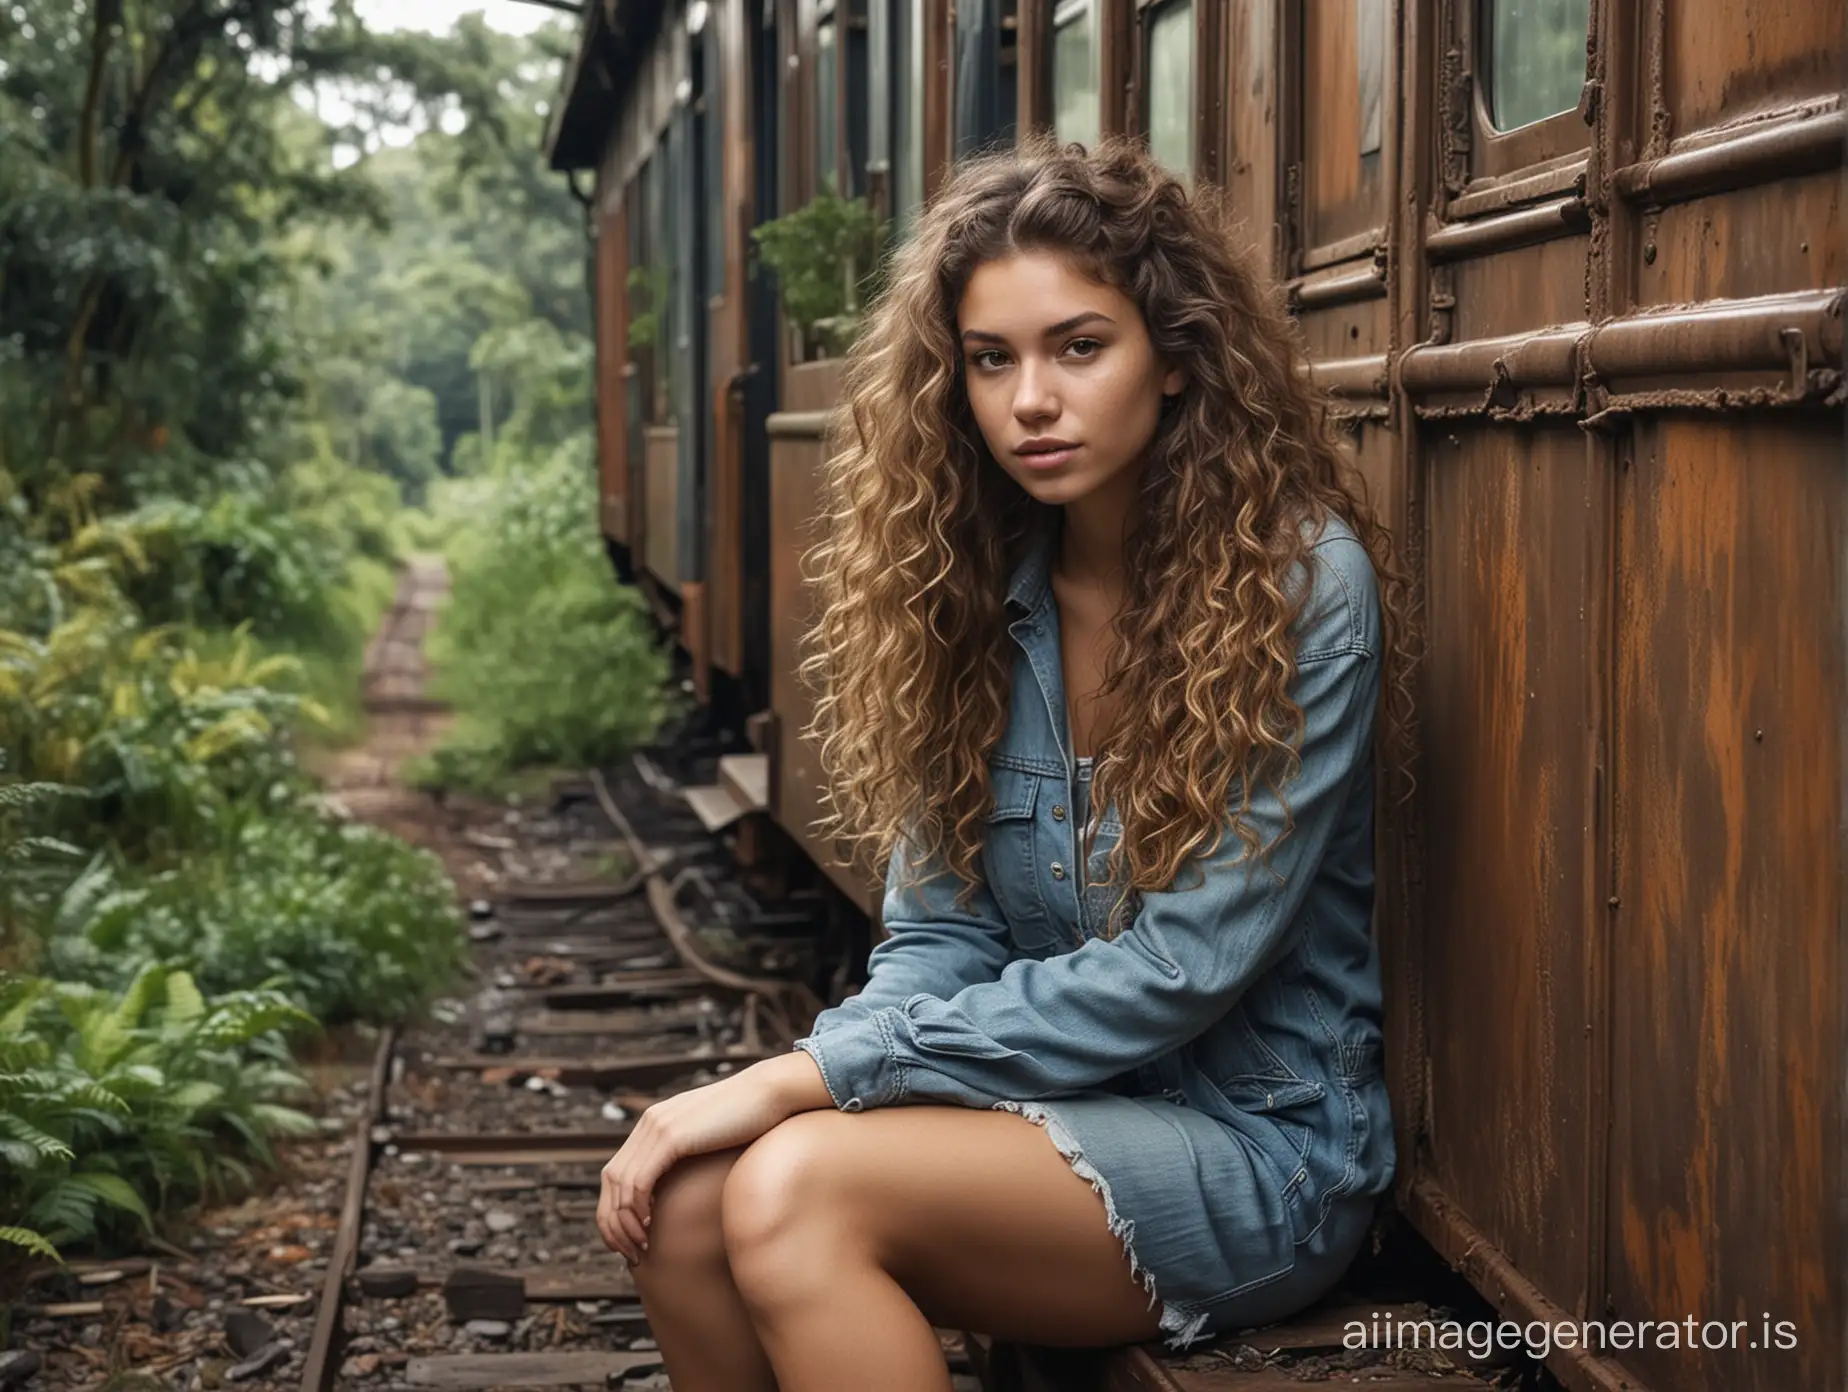 make a very realistic portrait of a beautiful girl, curly long hair, casual clothes, sitting in the doorway of a stopped train carriage, the train carriage is damaged and dusty and overgrown with bushes and moss, background is an old unused train station in the rainforest, cloudy weather.